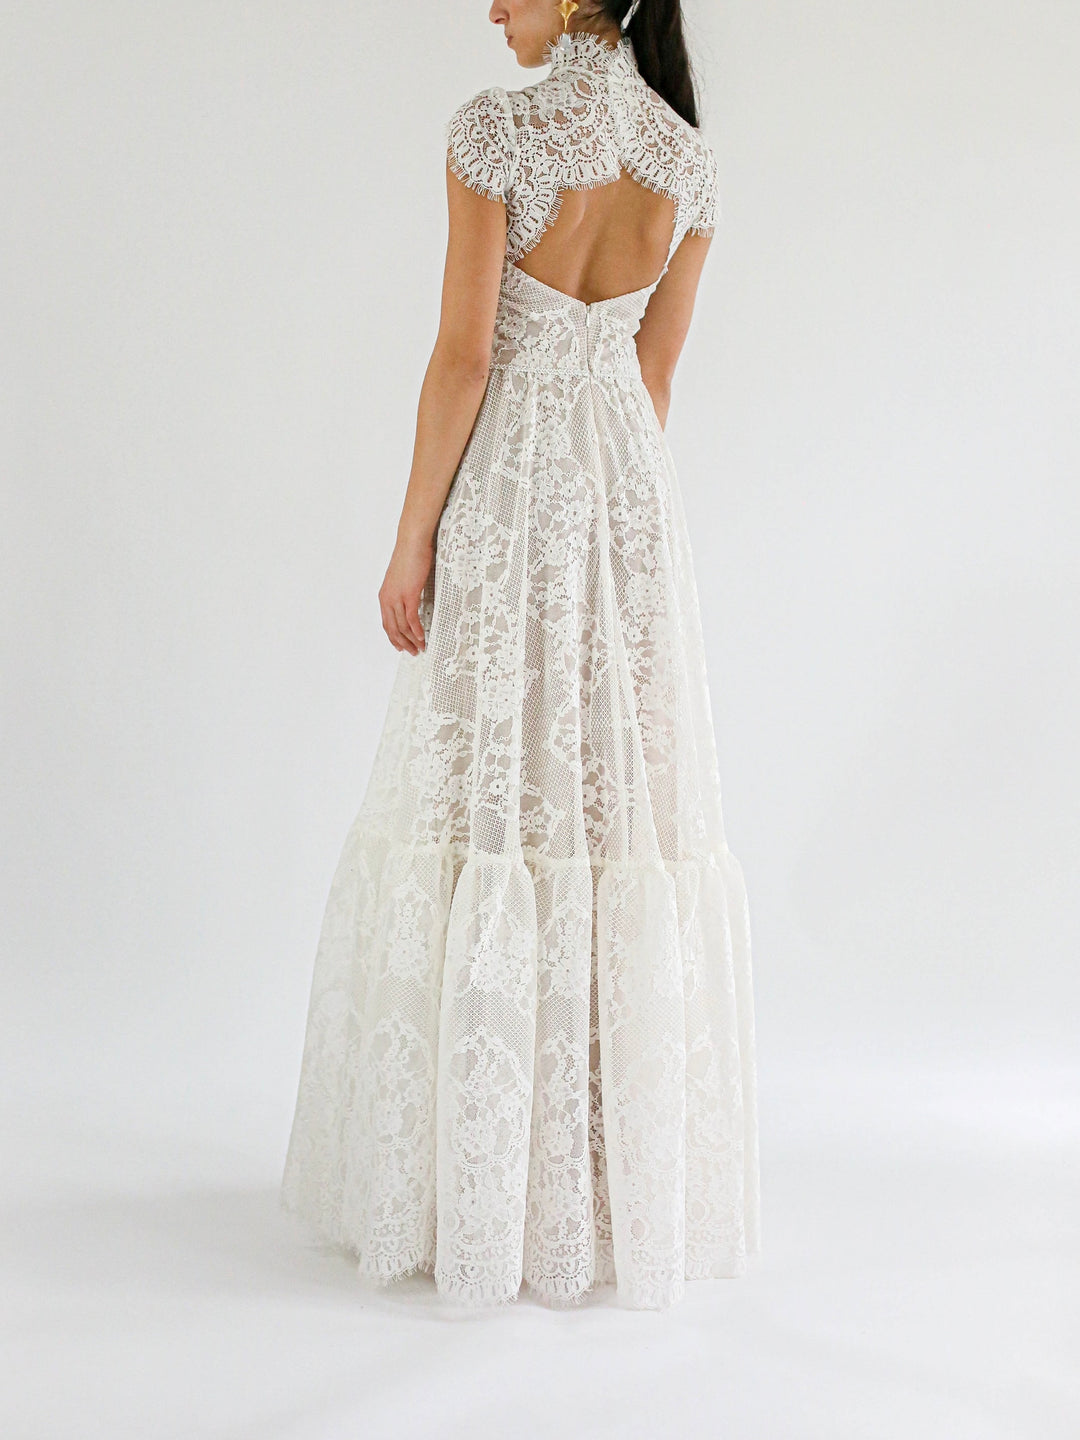 A view of the open back Carol Cap Sleeve Lace Dress